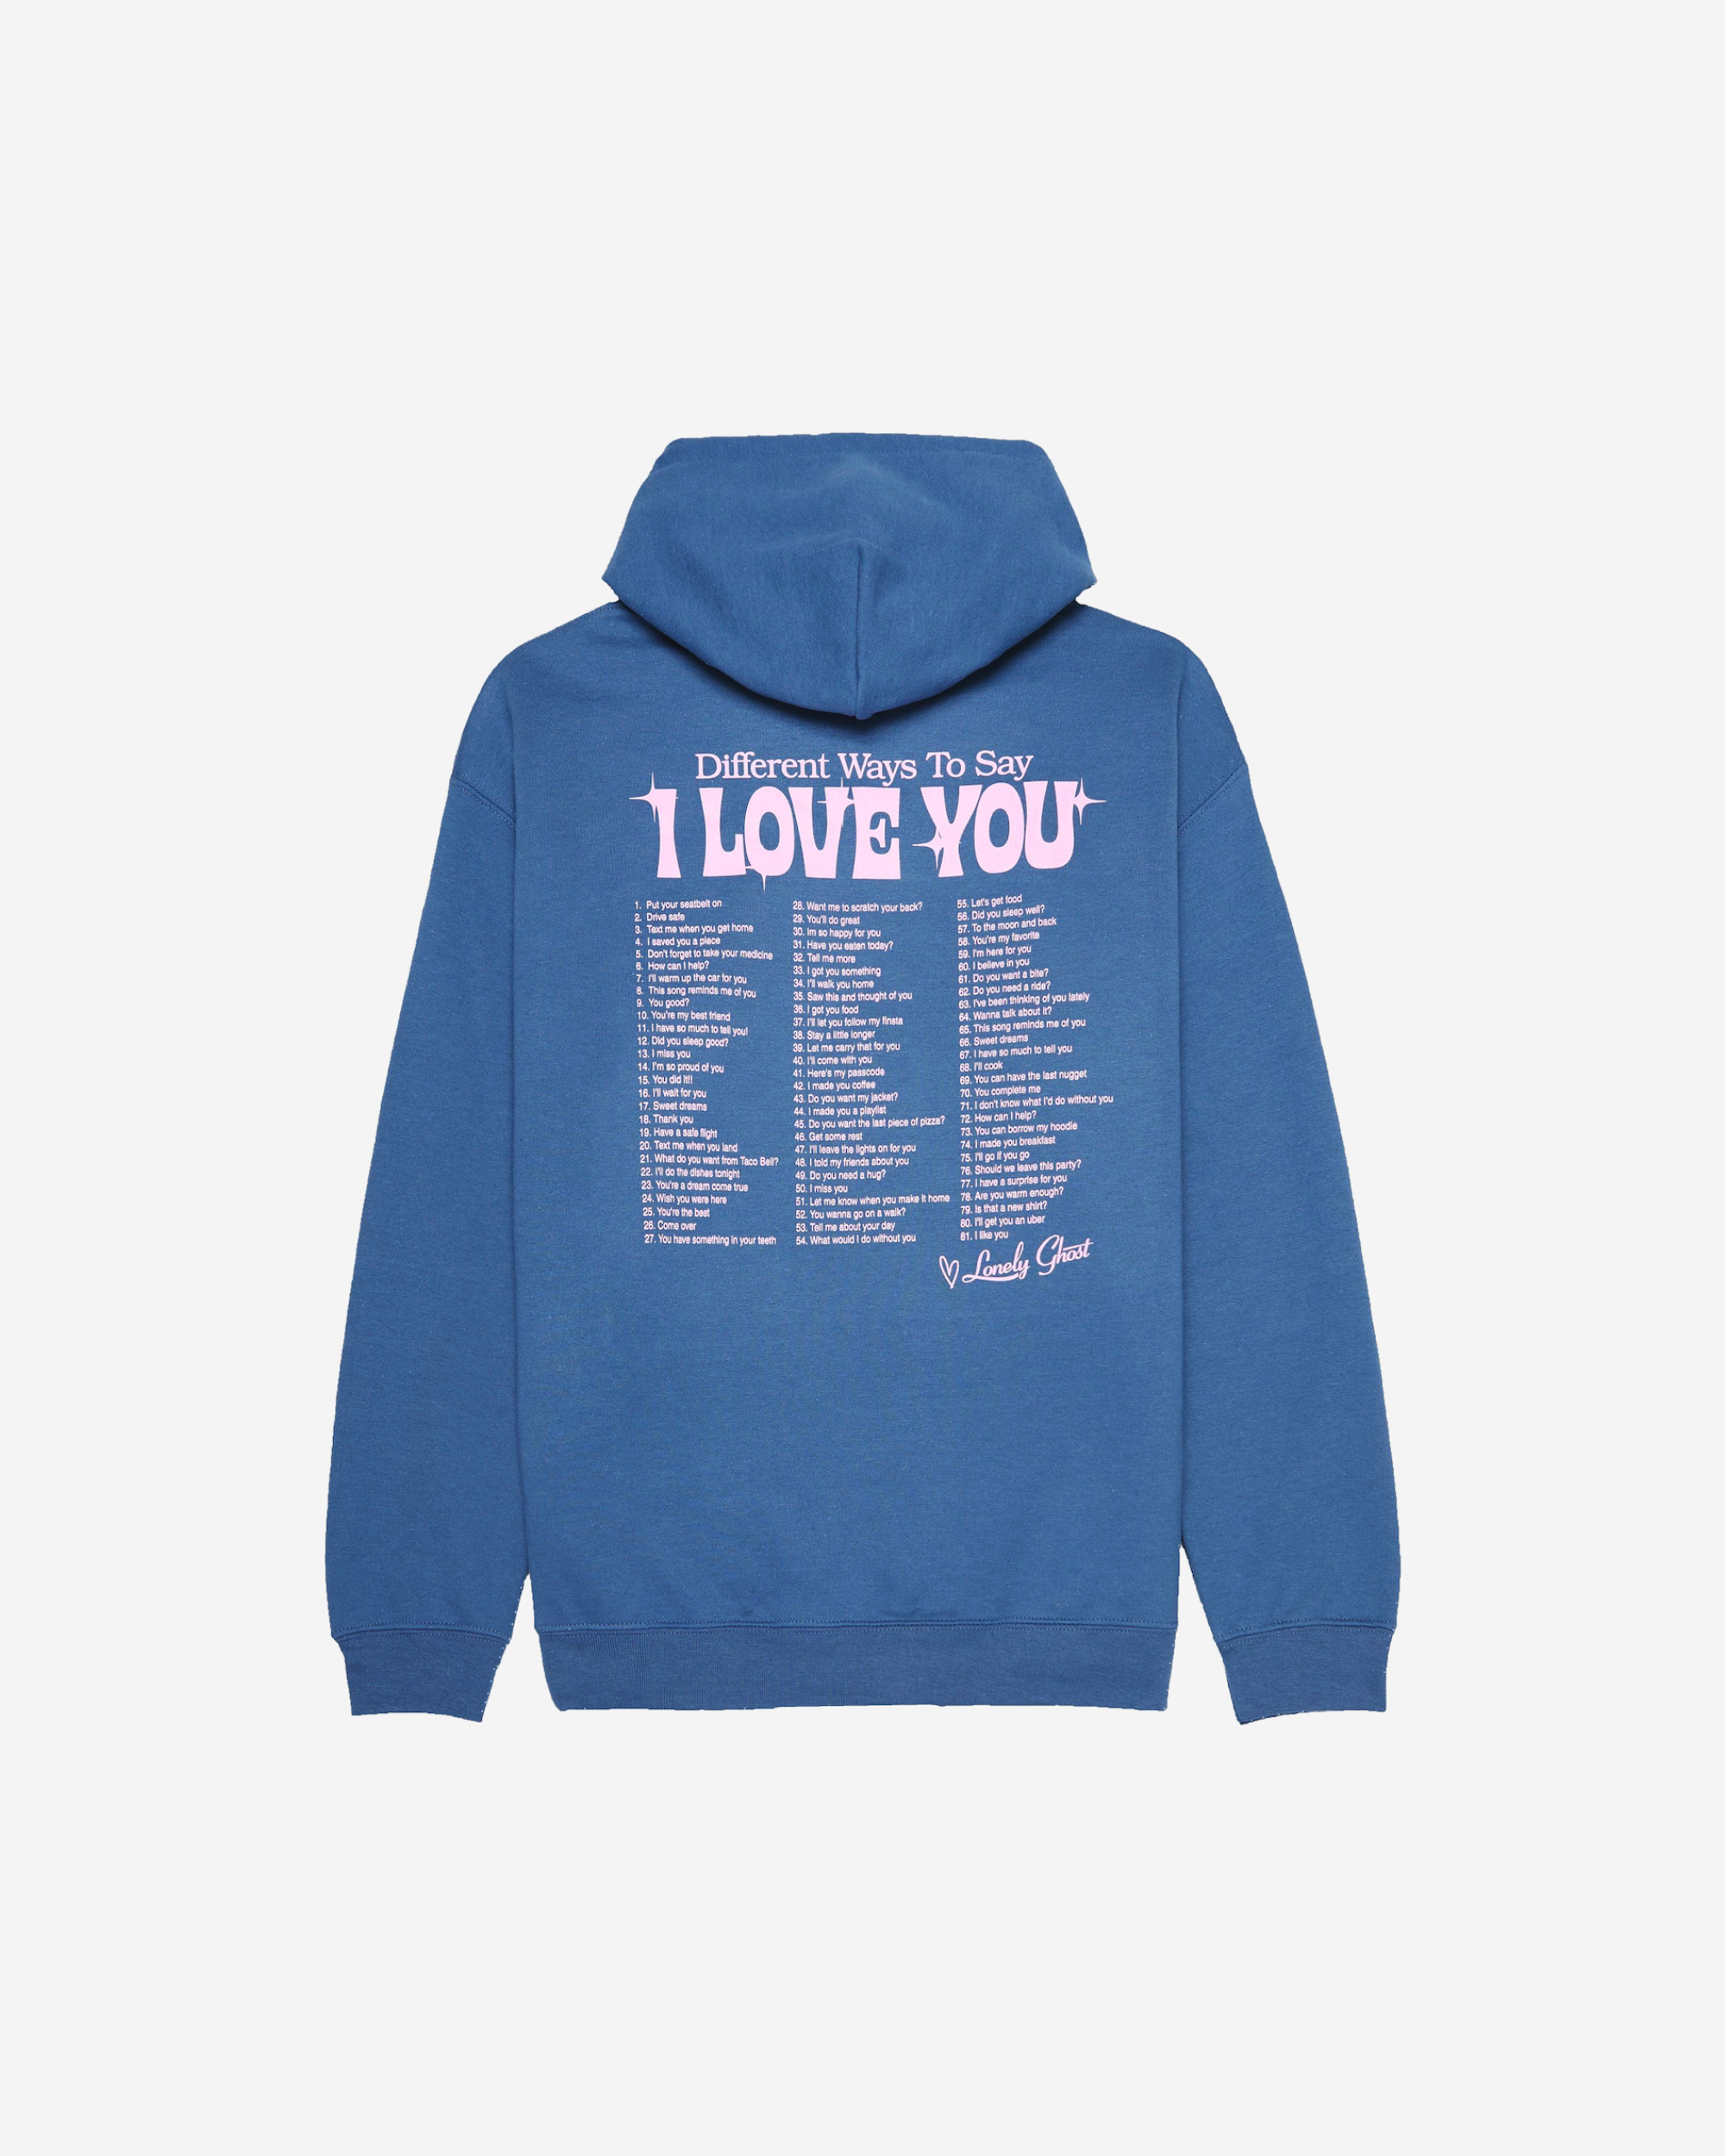 Go For a Walk Hoodie